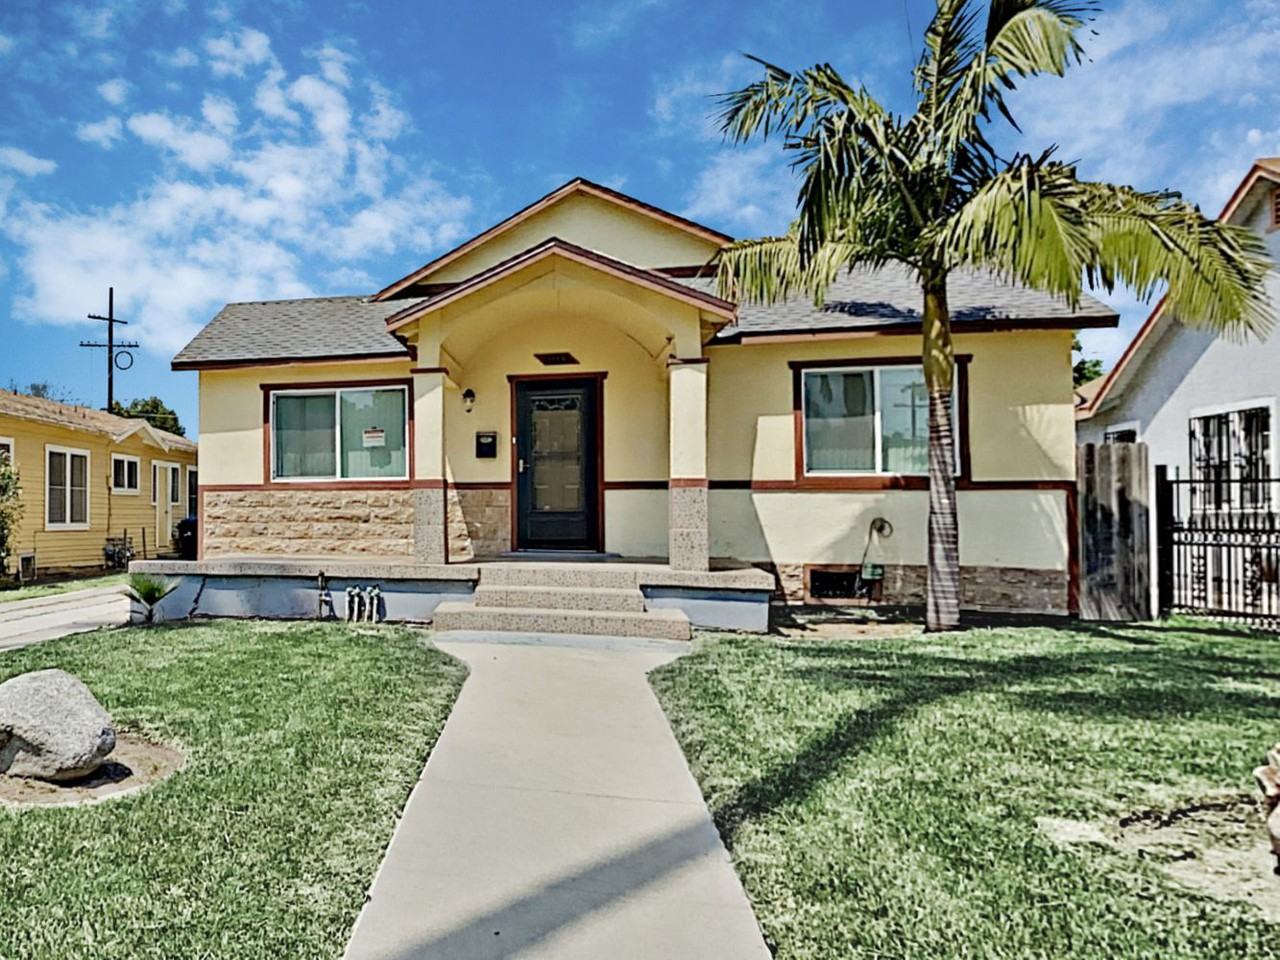 5025 3rd Ave, Los Angeles, CA 90043 3 Bedroom House for Rent for 2,695/month Zumper